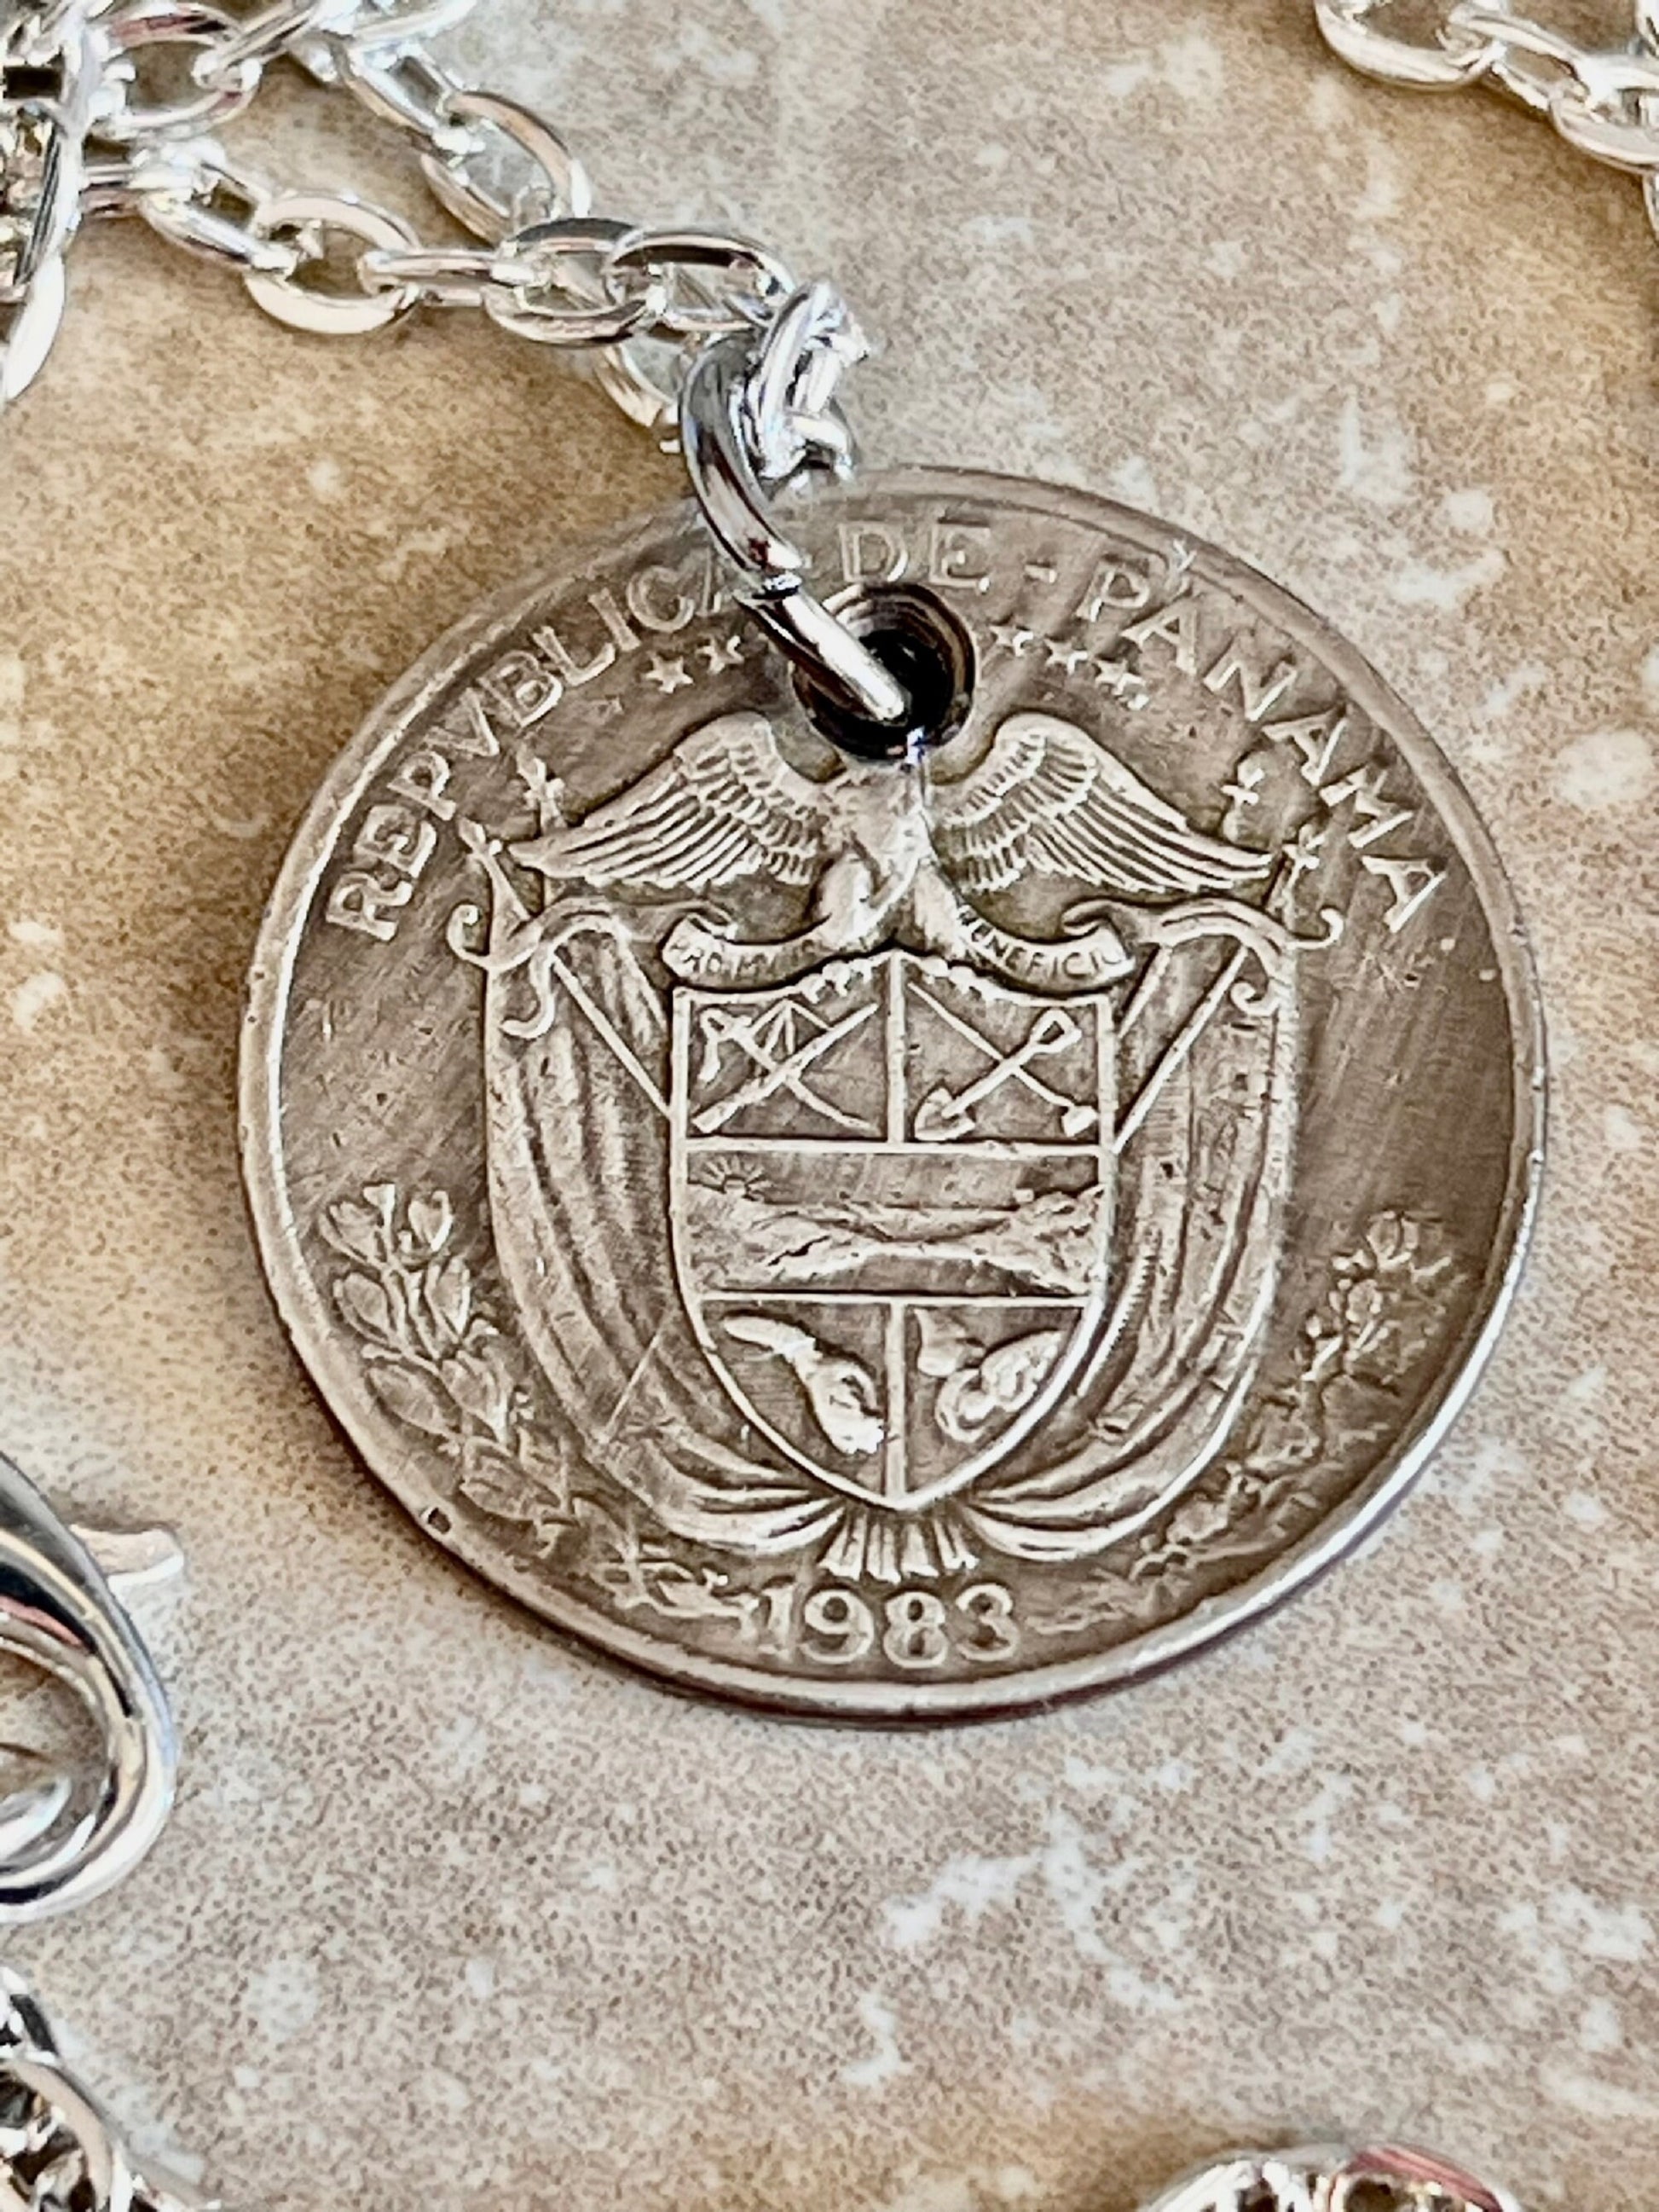 Panama Coin Necklace Panamanian Pendant De Balboa Personal Necklace Old Handmade Jewelry Gift Friend Charm For Him Her World Coin Collector